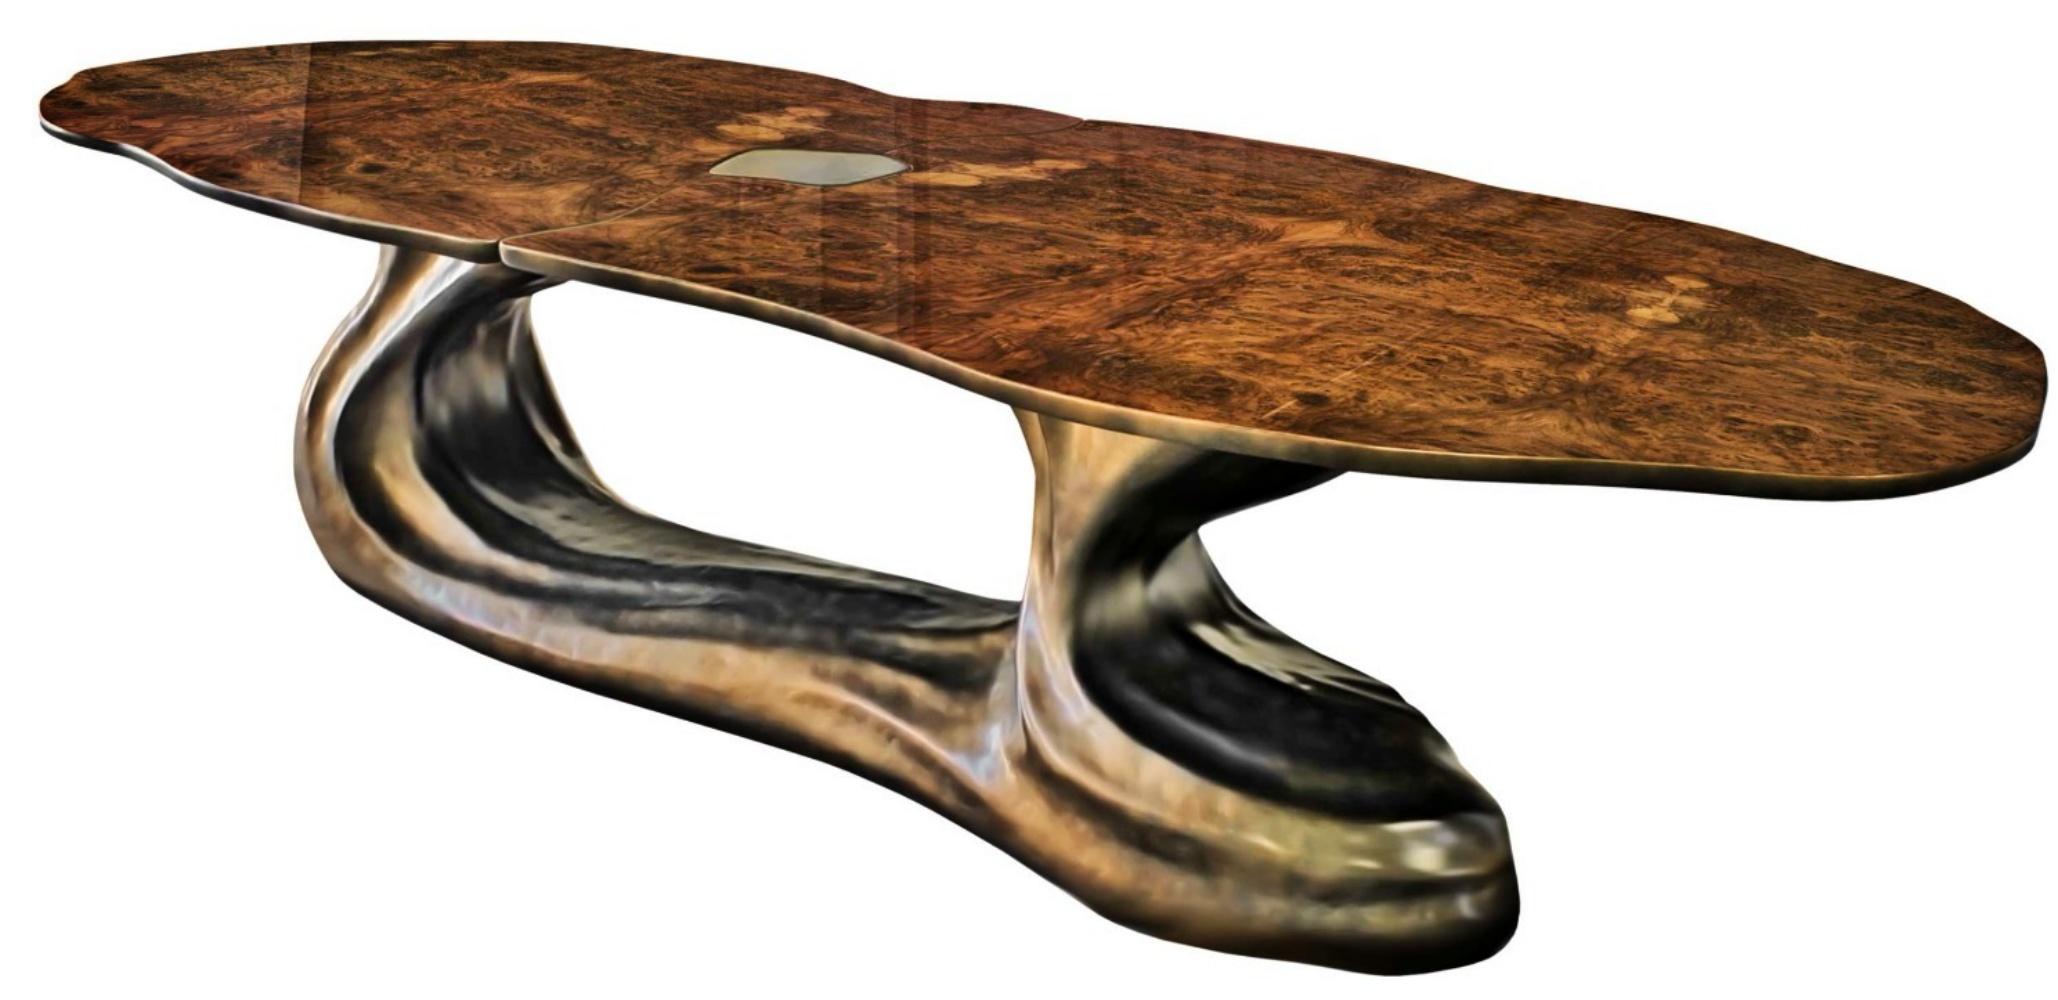 Modern New Design Dining Table in Walnut Veneer for 10/12 Persons Ready Delivery Now